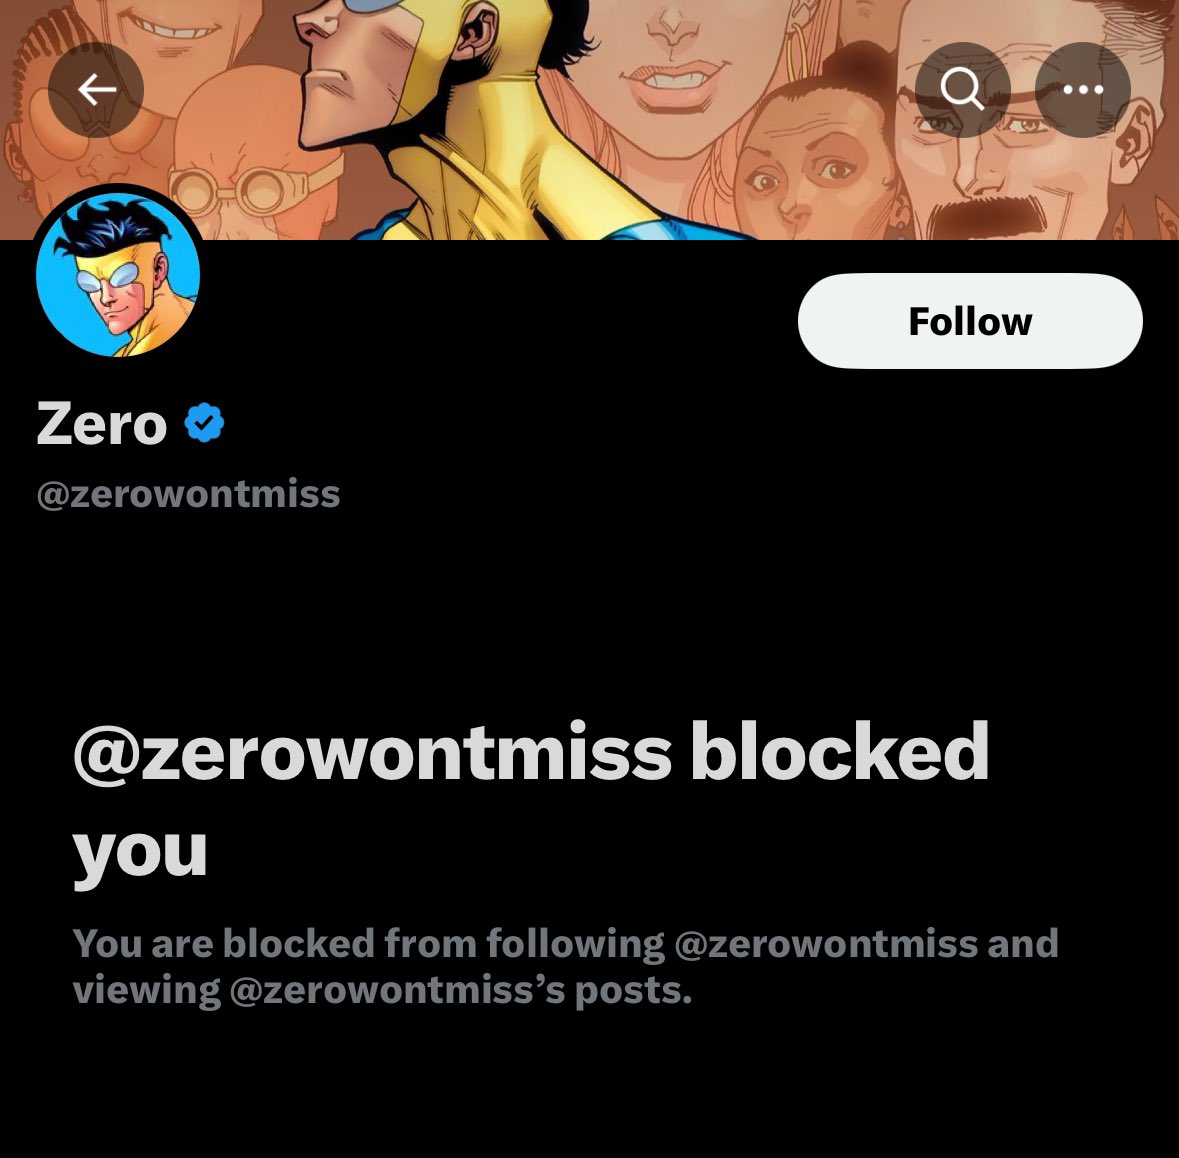 A thread of @zerowontmiss being a full on piece of shit (homophobia, transphobia, sexualizing minors, ableism, racism, and just being an asshole)